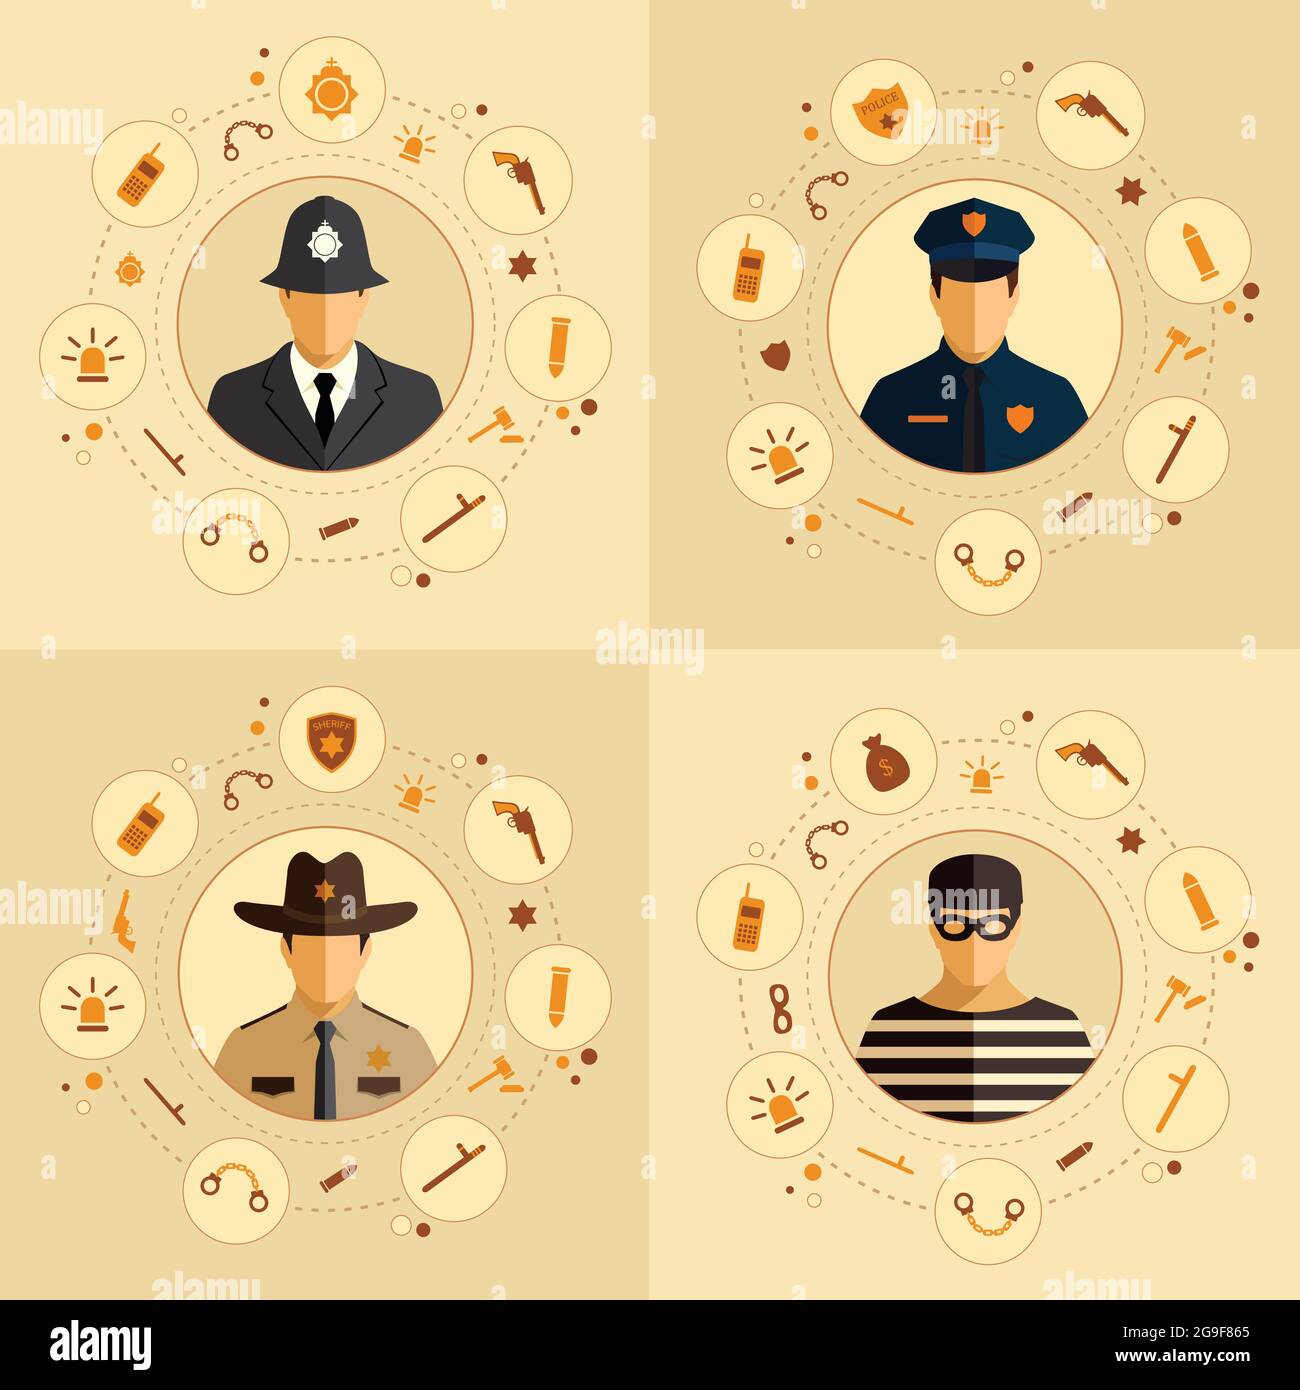 vector security icon, police, law, crime badge set illustration Stock Vector